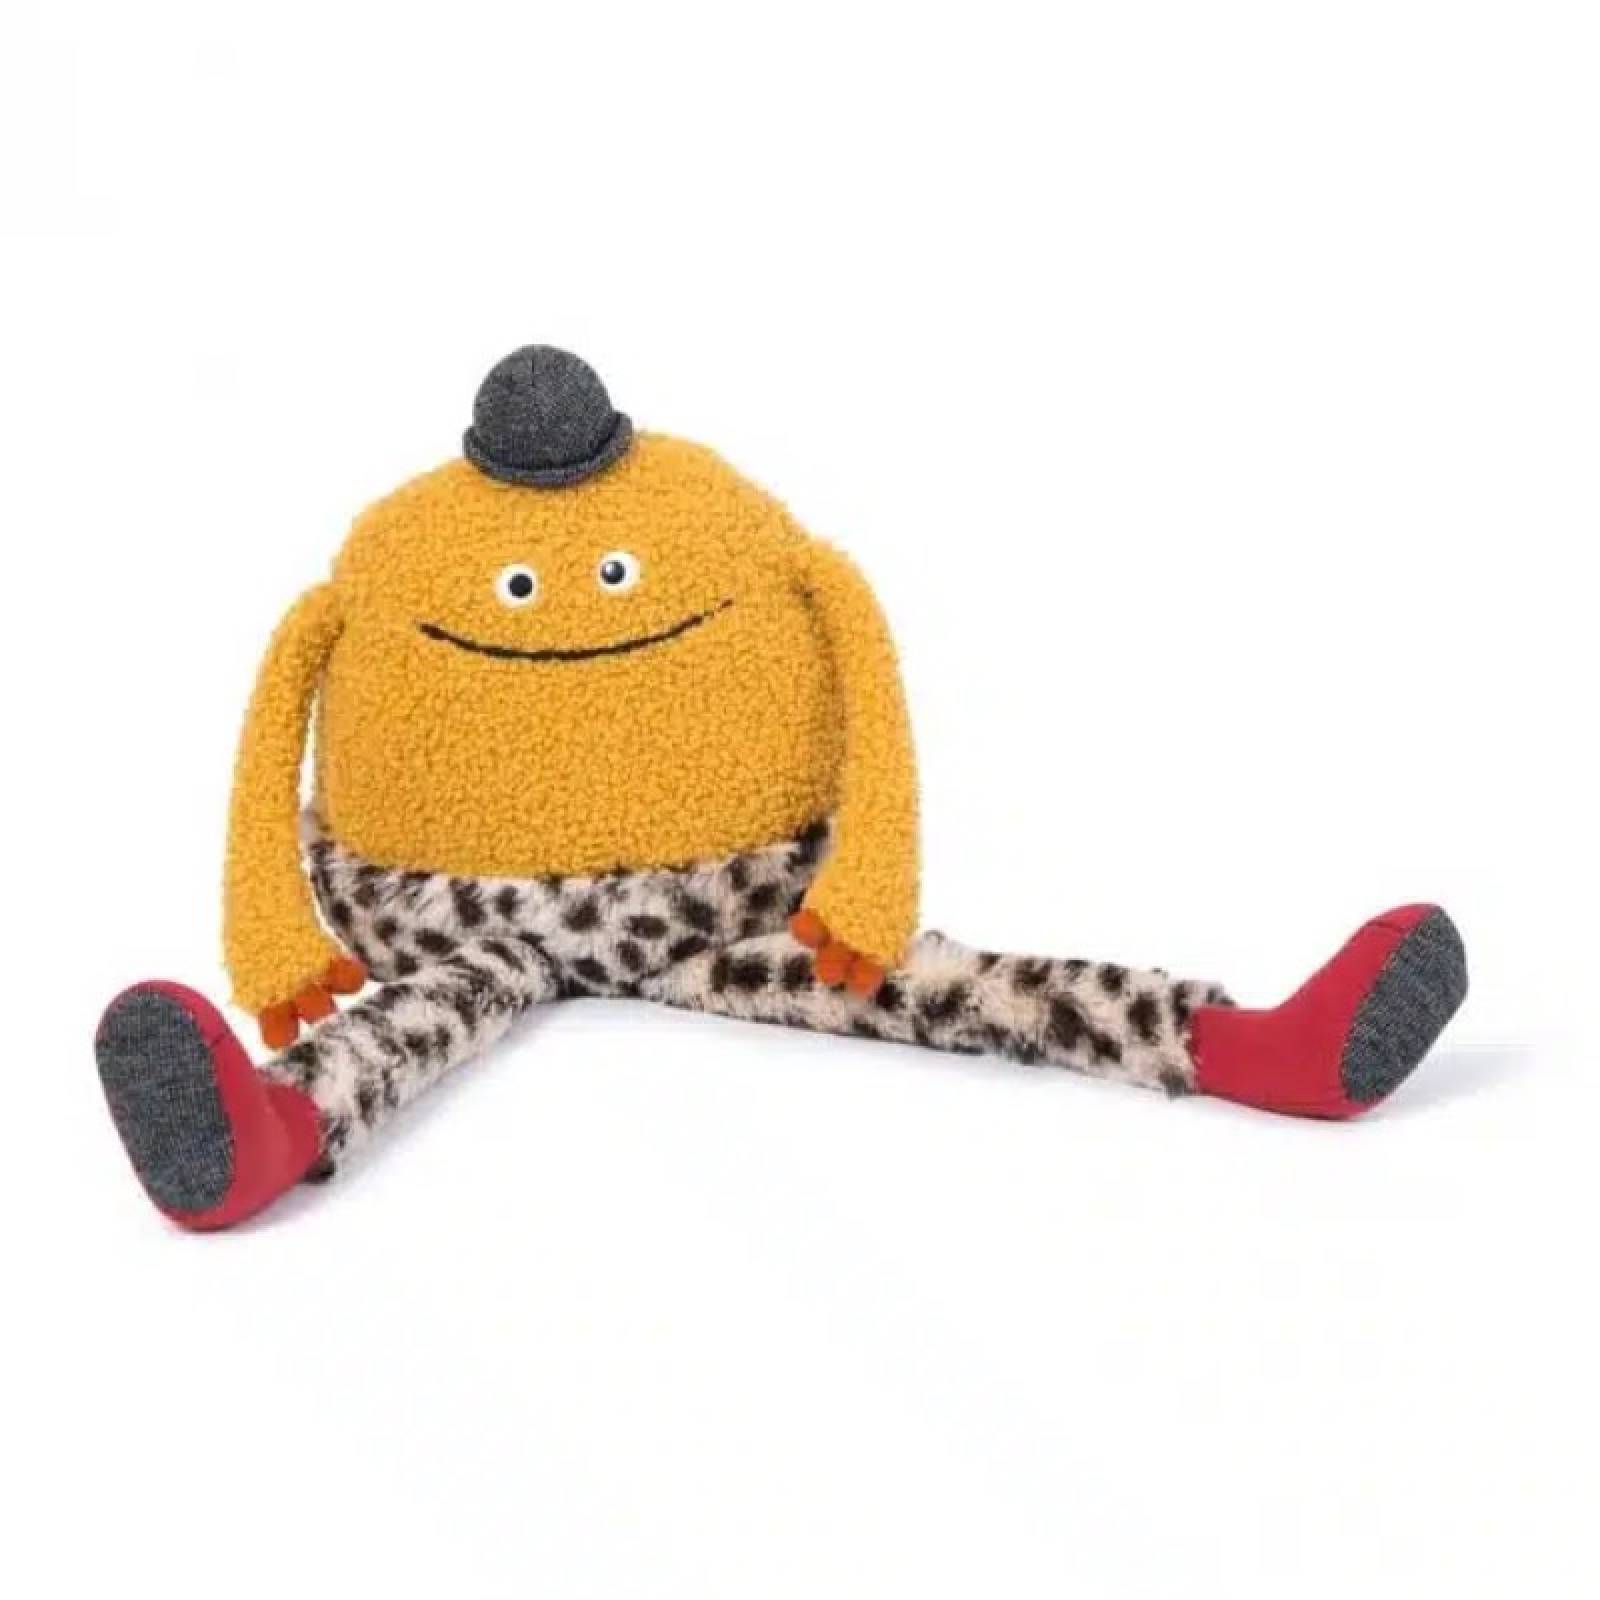 Mouni The Monster With Leopard Print Legs Soft Toy 0+ thumbnails